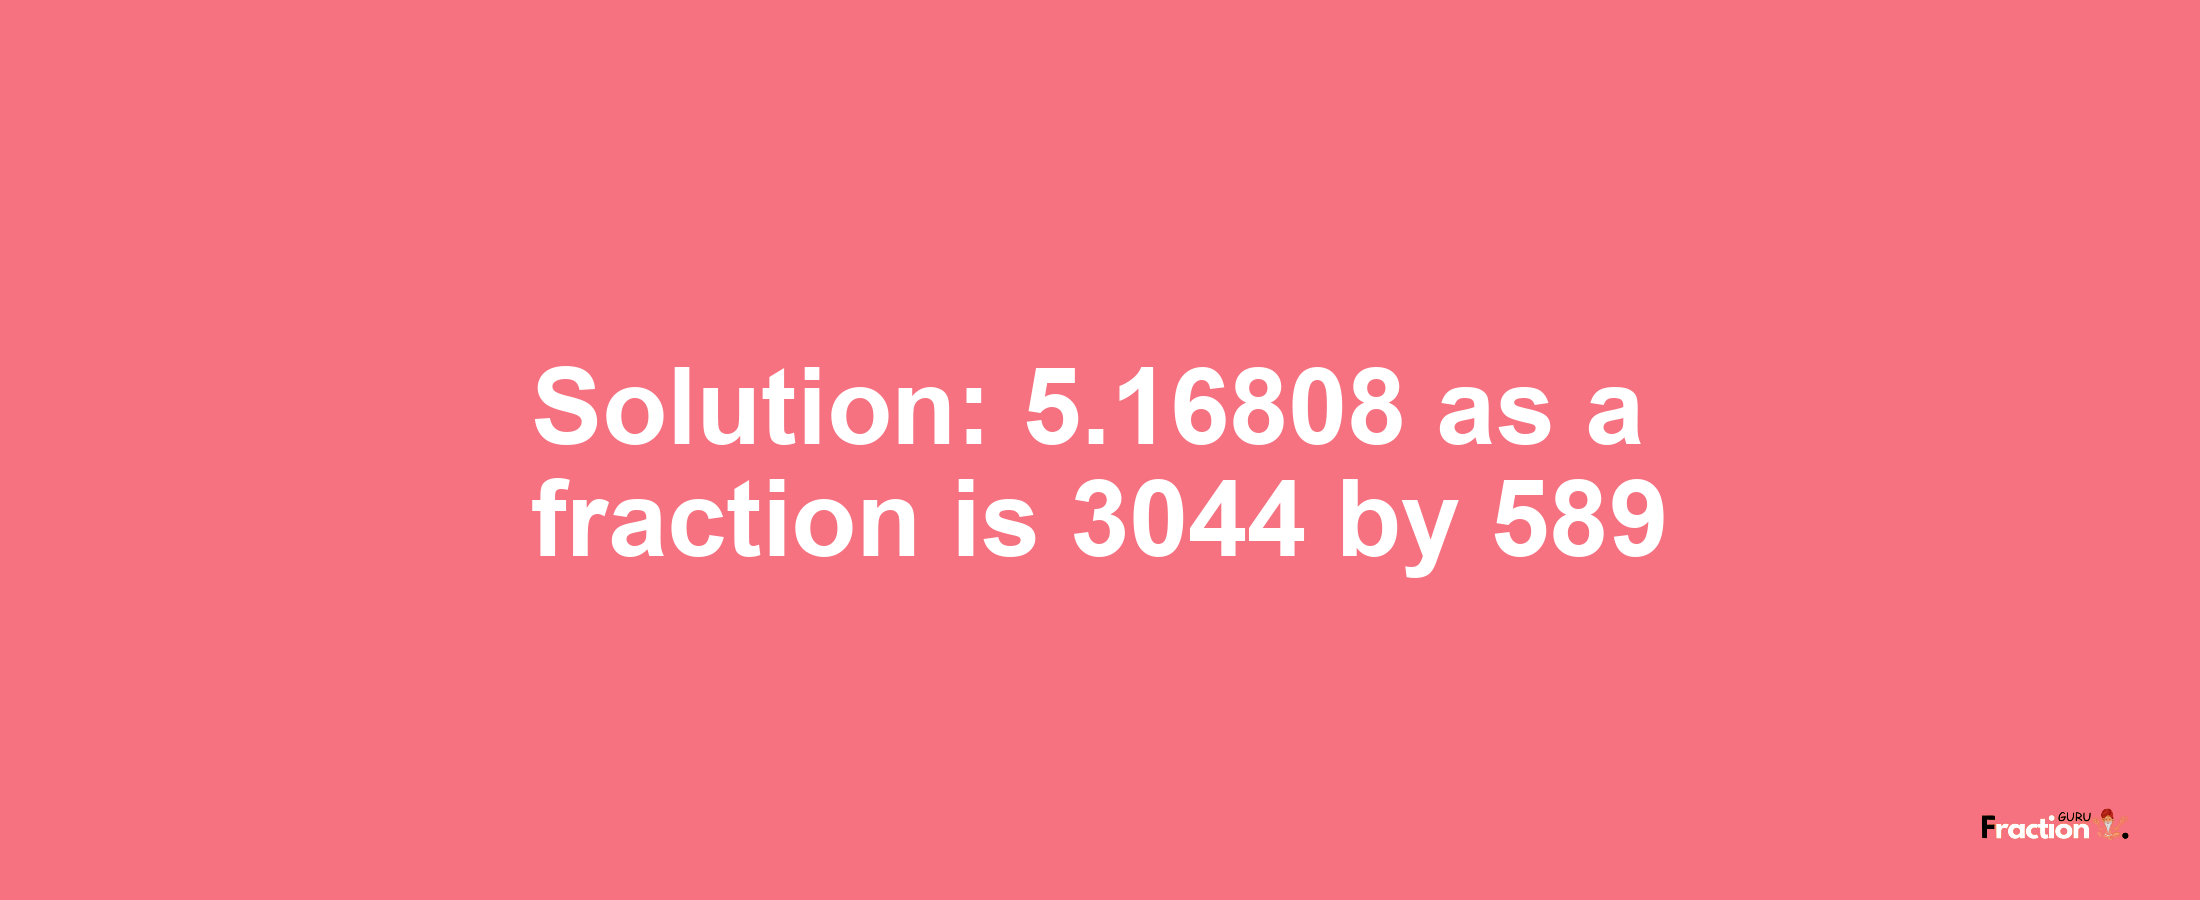 Solution:5.16808 as a fraction is 3044/589